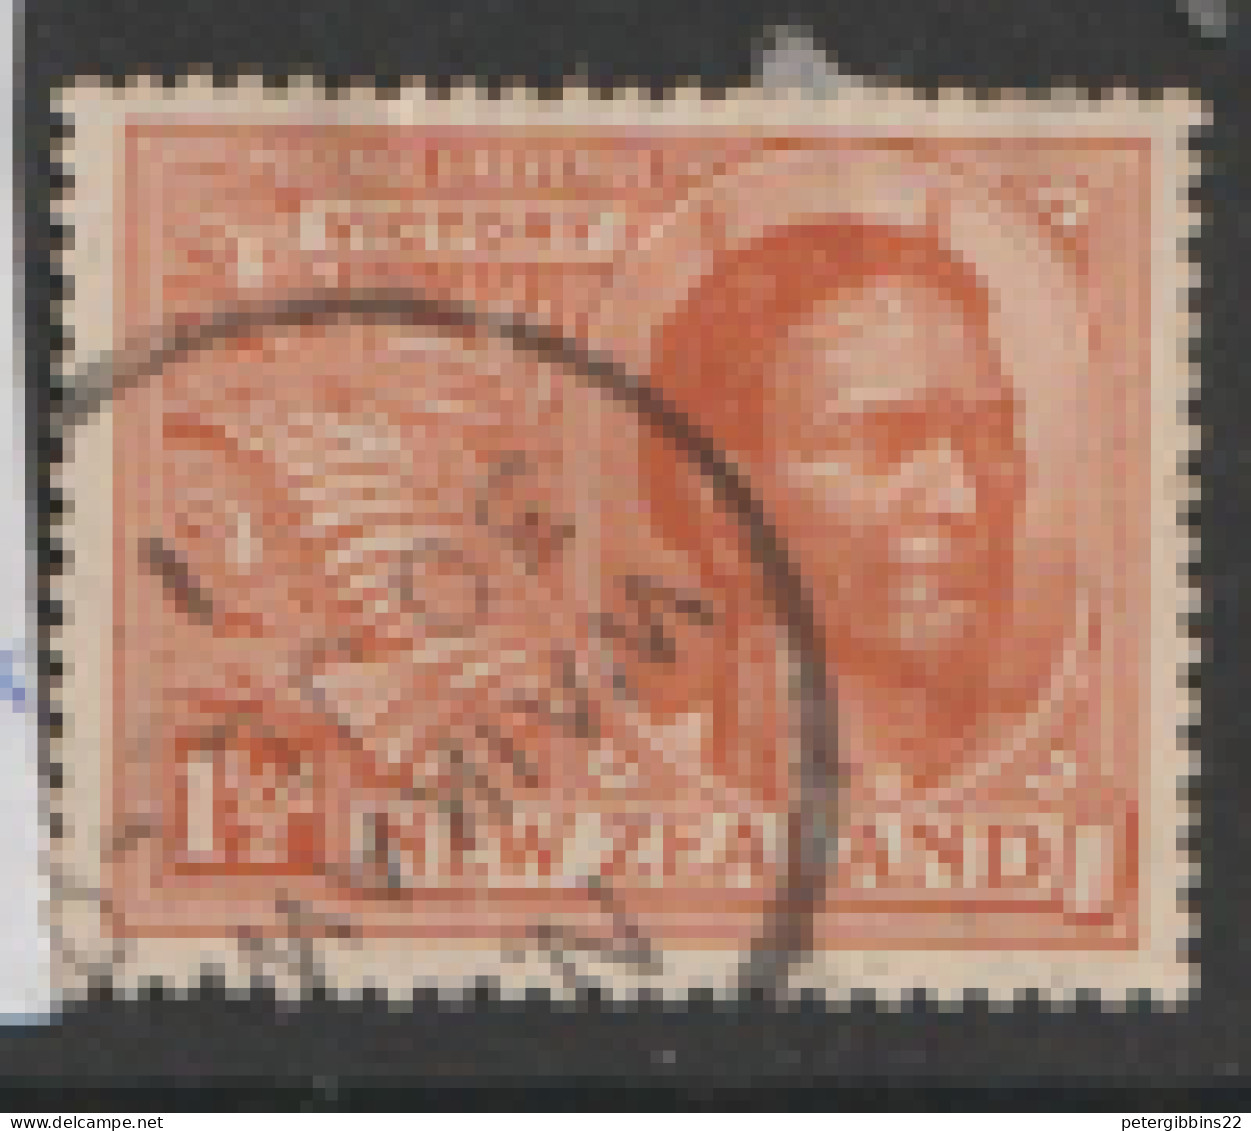 New  Zealand  1920 SG  455   1.1/2d Victory   Fine Used - Gebraucht